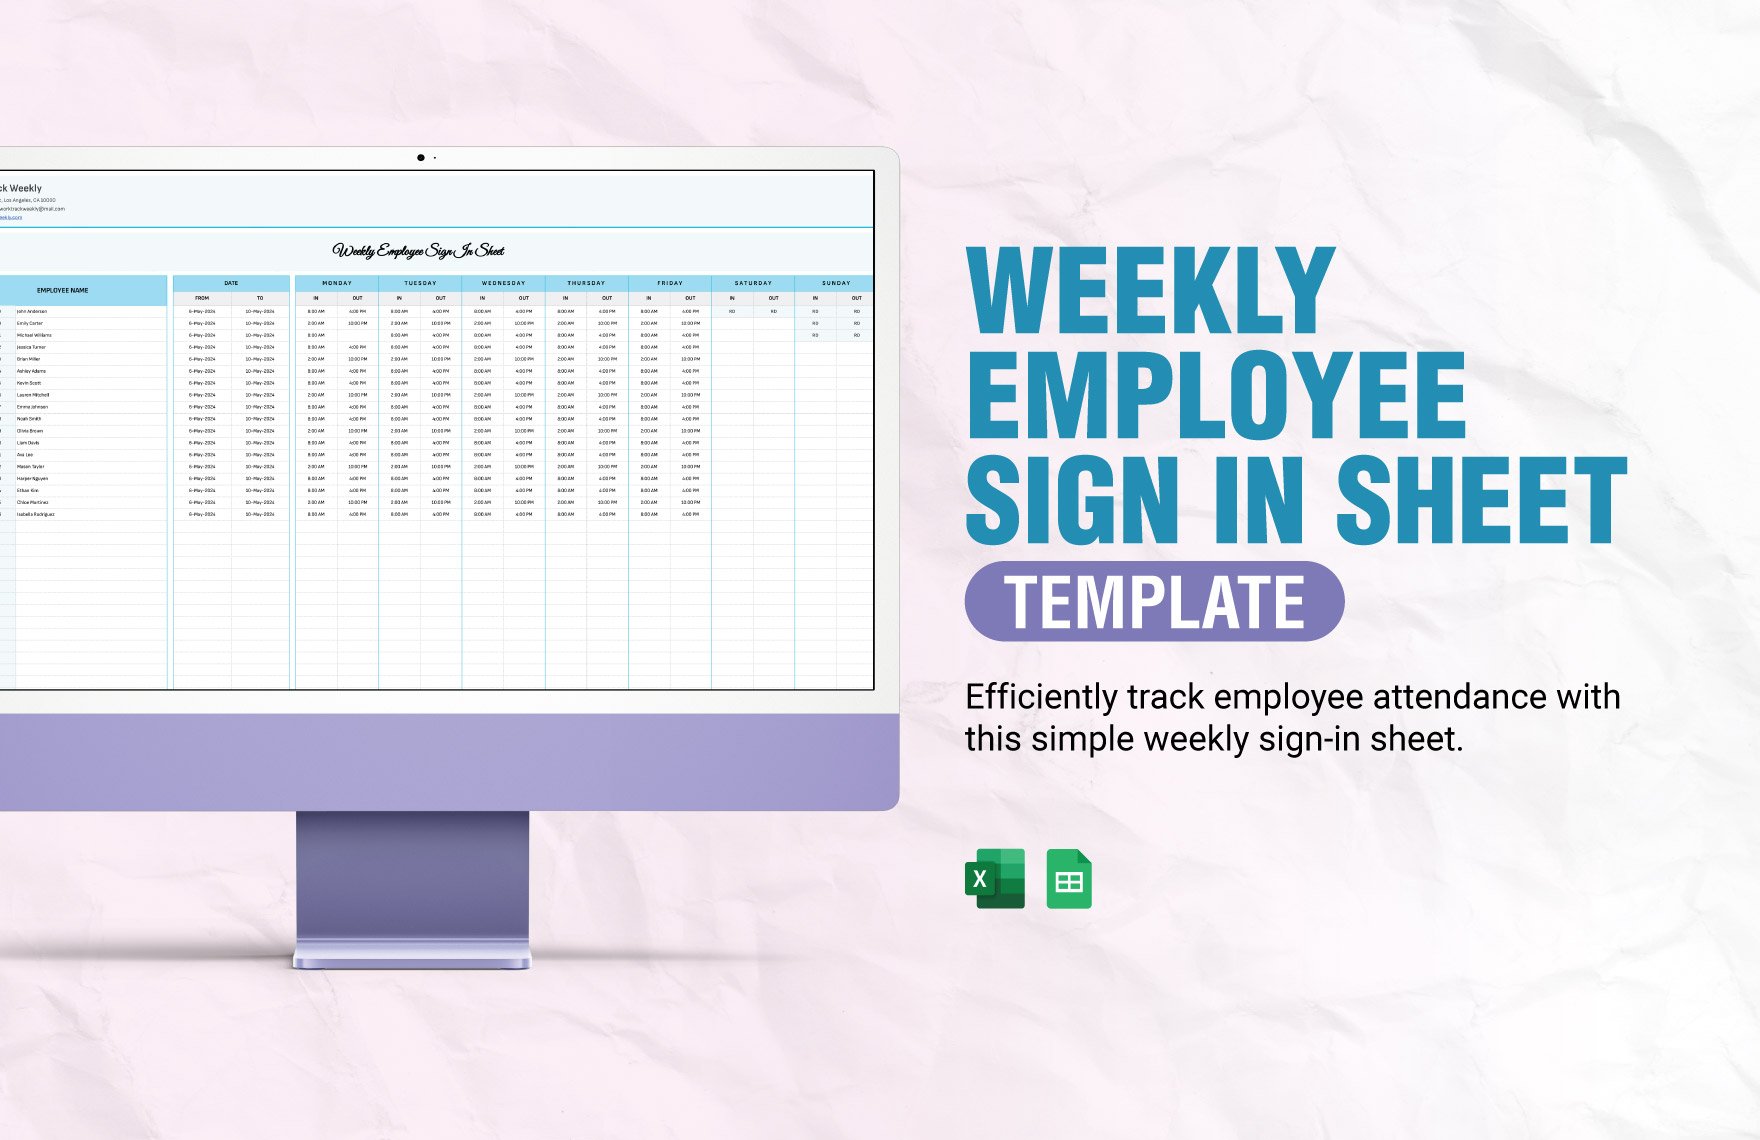 Weekly Employee Sign in Sheet Template in Excel, Google Sheets